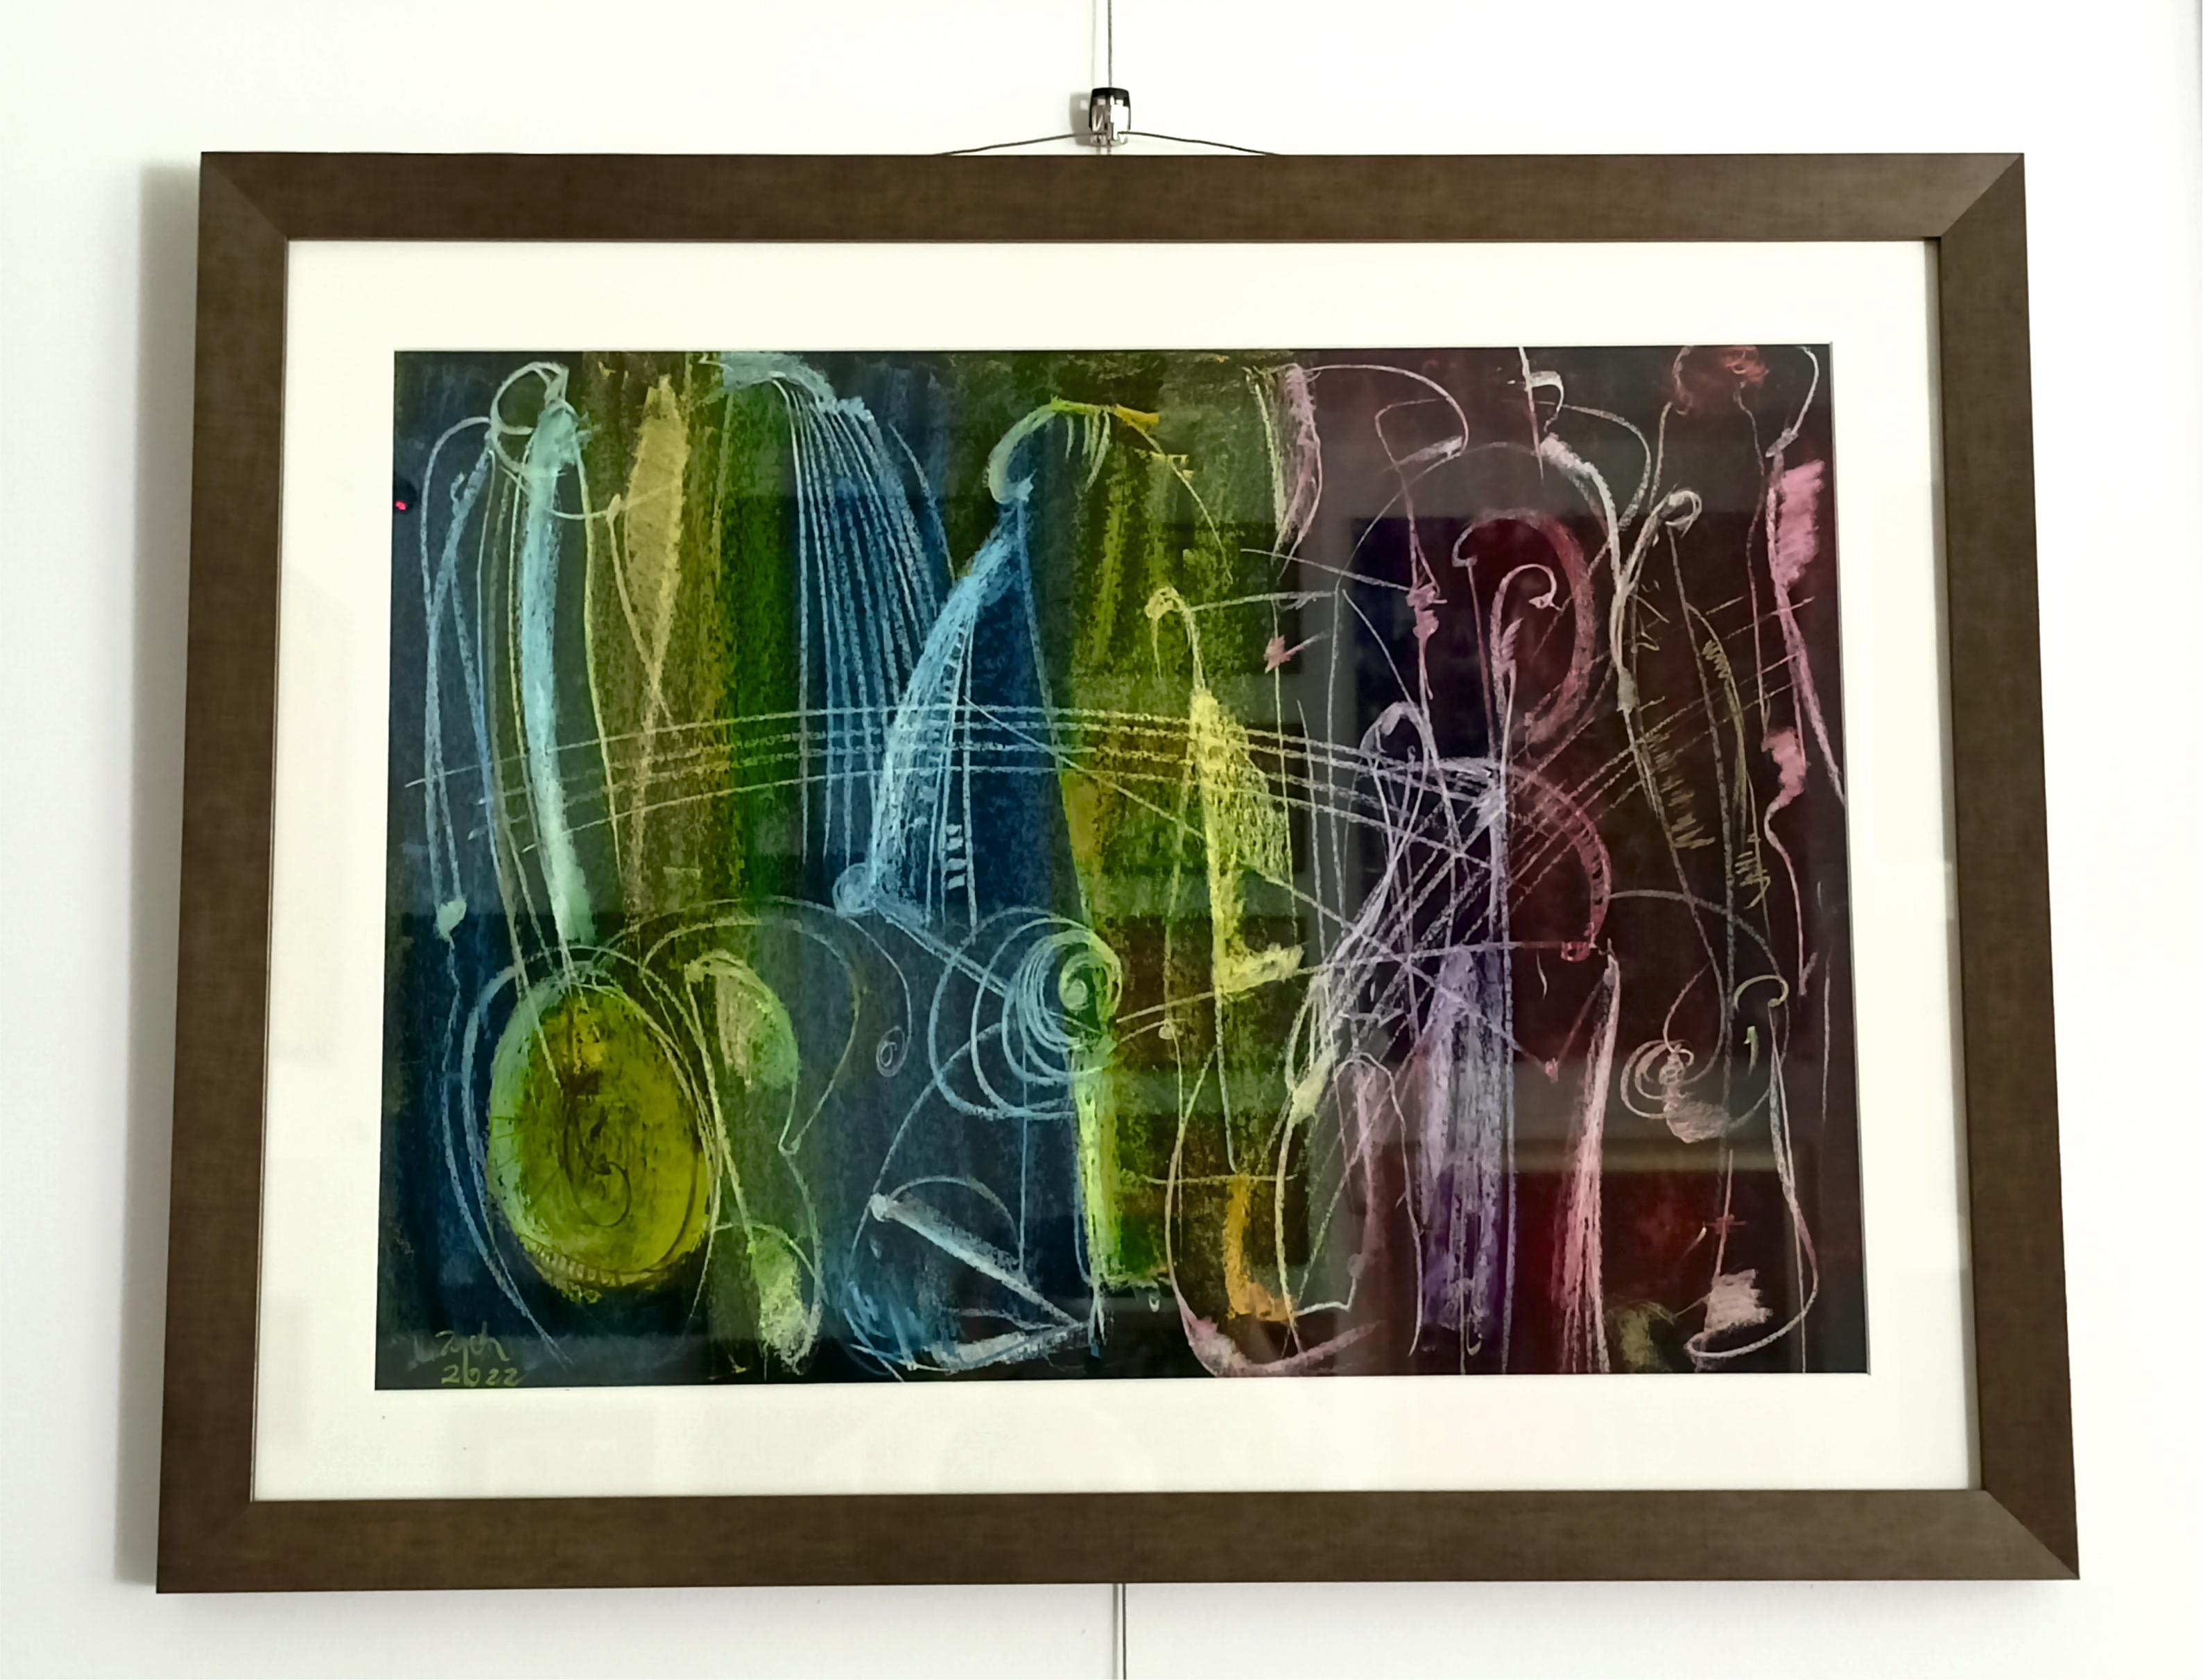 Jazz abstraction / Oil pastel / 50 x 70 cm - Painting by Tadeusz Zych